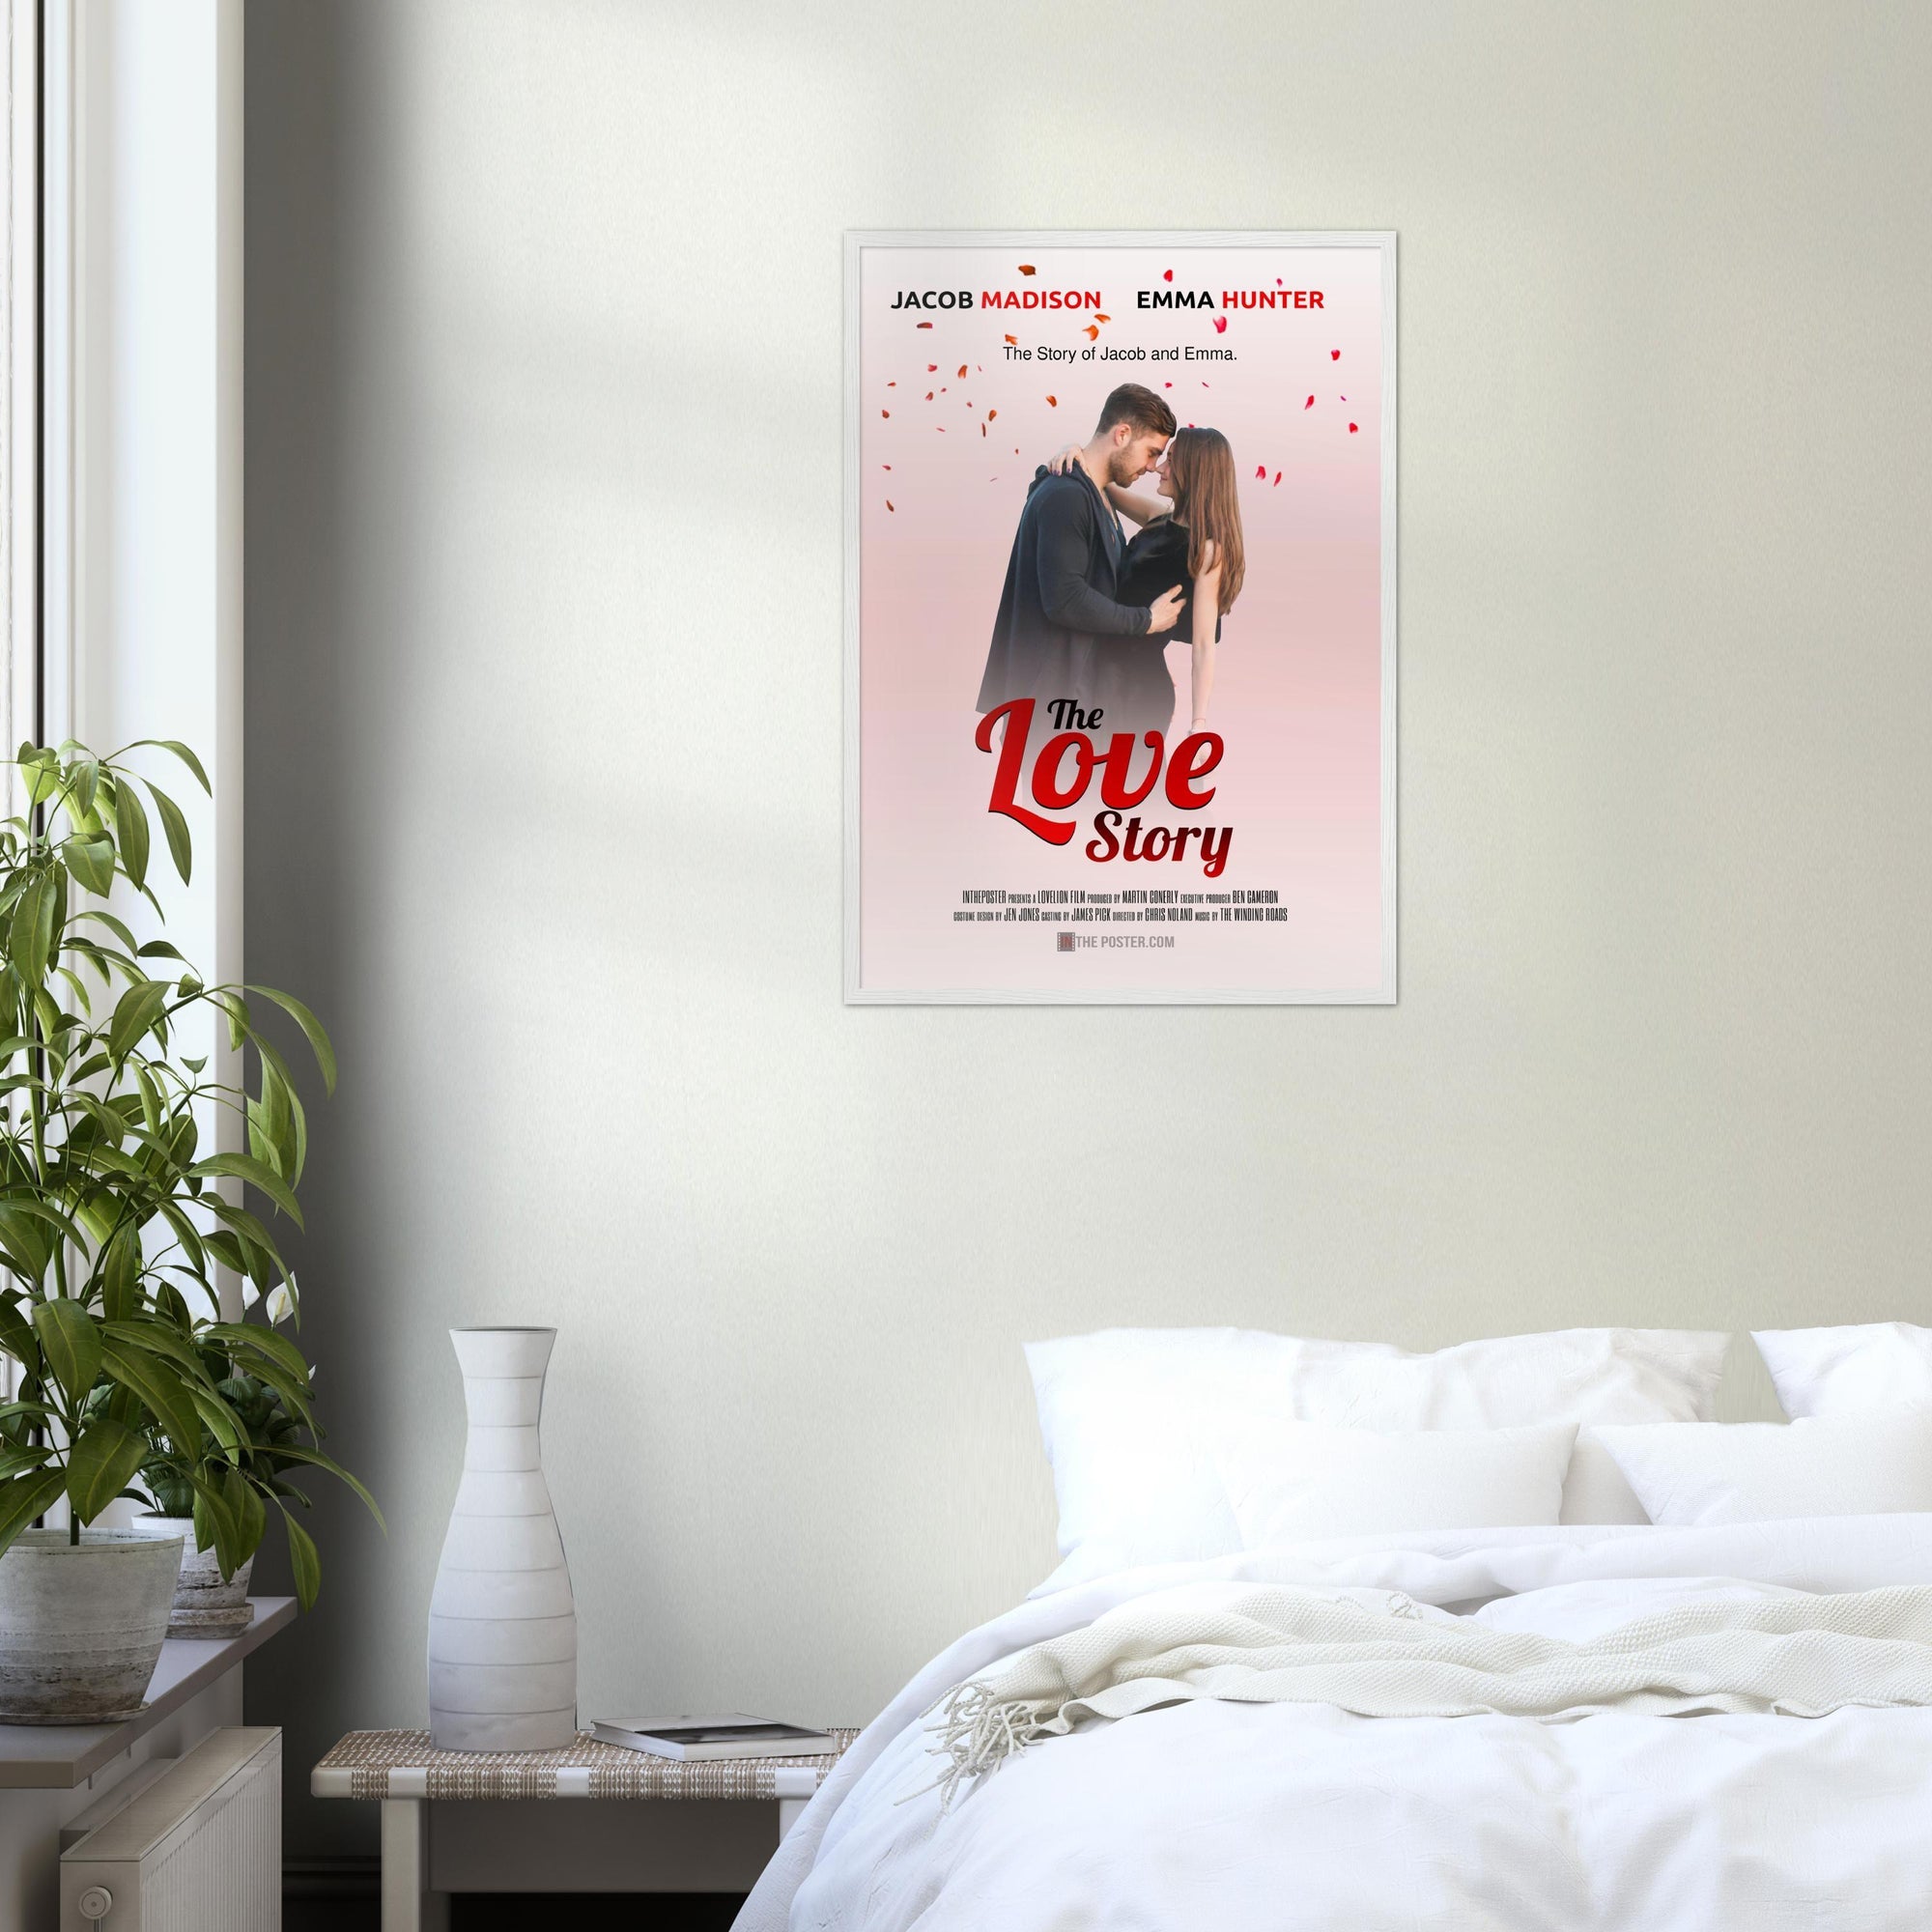 A bedroom wall with a regular white frame with a film poster called The Love Story